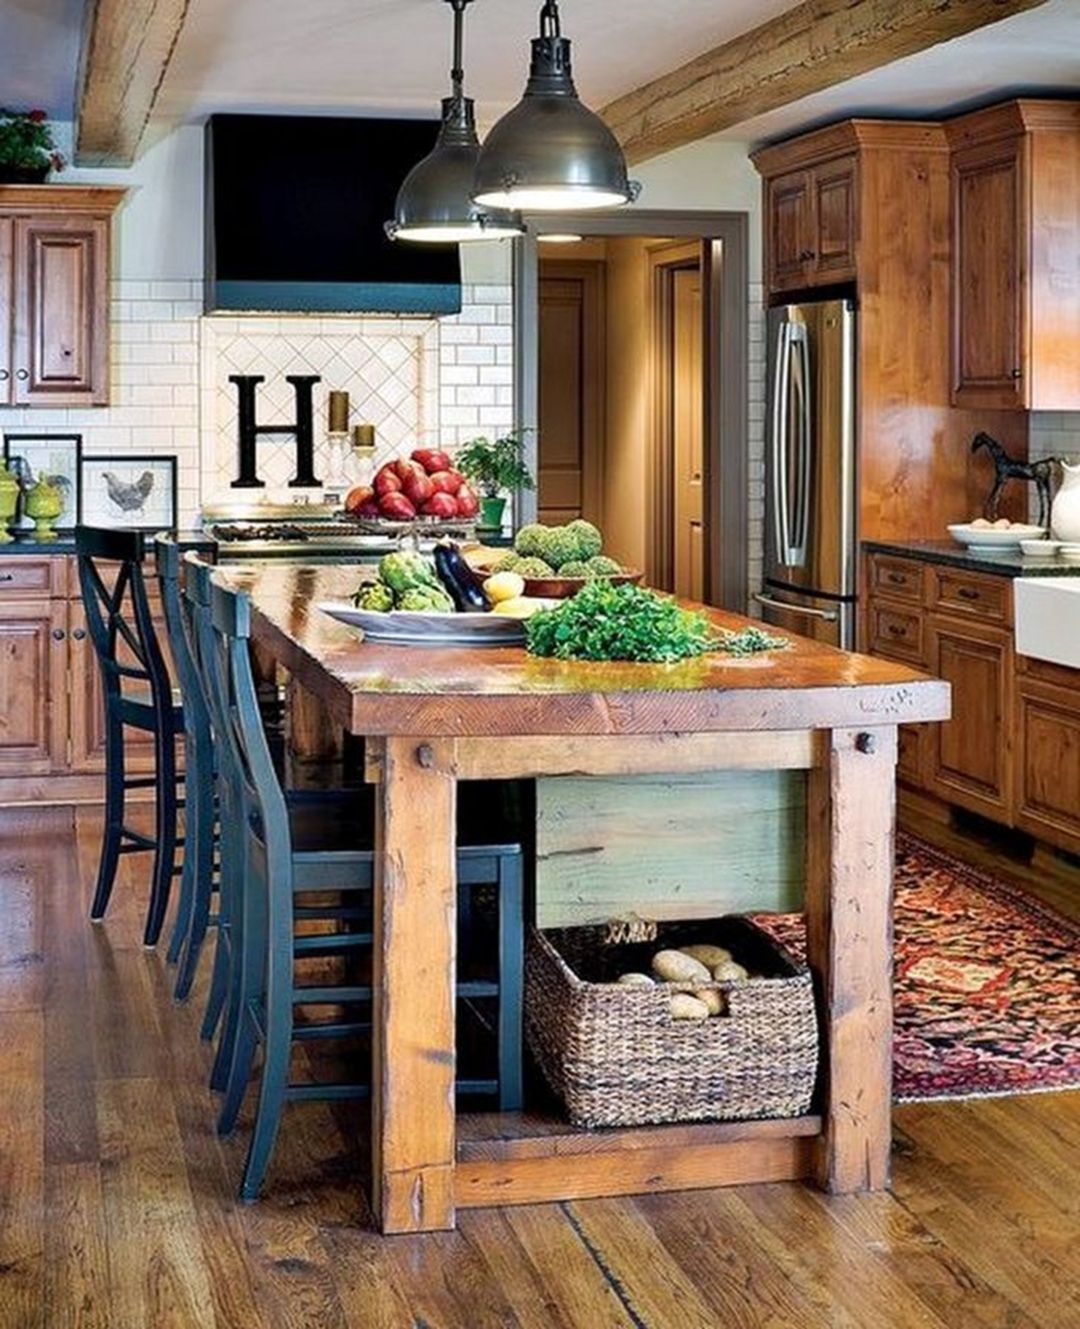 Rustic Homemade Kitchen